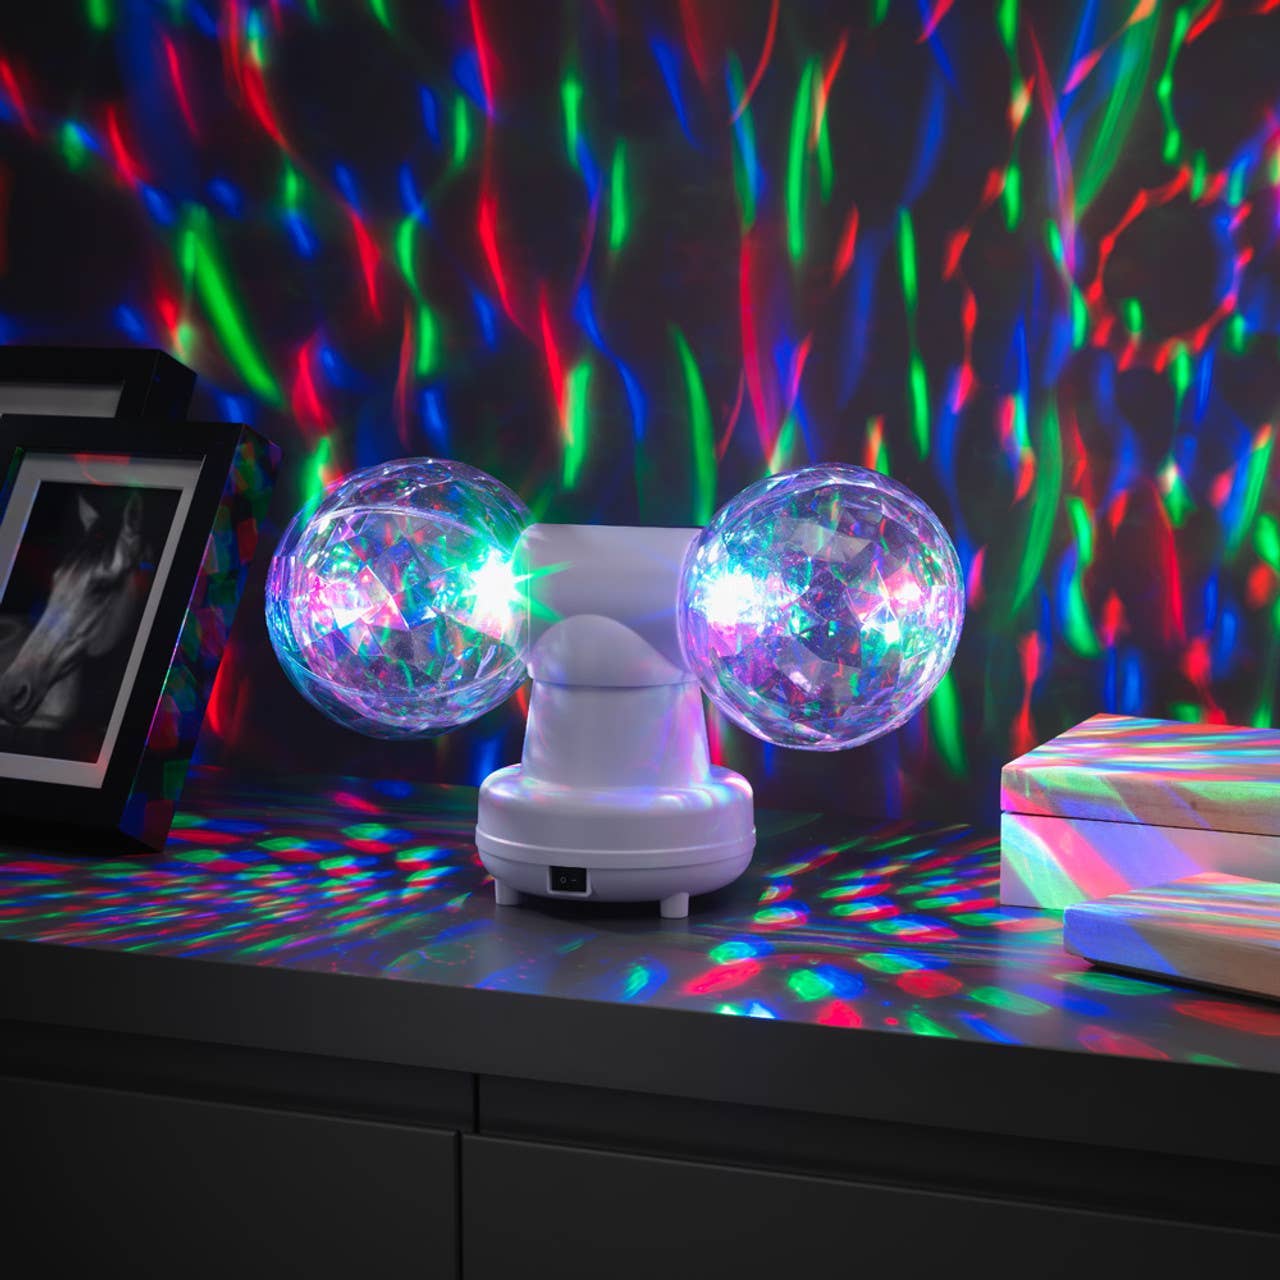 Twin Disco Ball in White, Give your Children the greatest light show on earth with these twin rotating disco balls!A stunning light effect which will look great in any dark room or bedroom creating a fantastic sensory focus in the room full of colour and light. This compact gadget is a party that you can move around. It has two rotating mirror balls, measuring 10 cm each.These reflect multi-coloured LED lights, creating a flurry of colour on your walls! This light is fantastic for house parties (did we ment